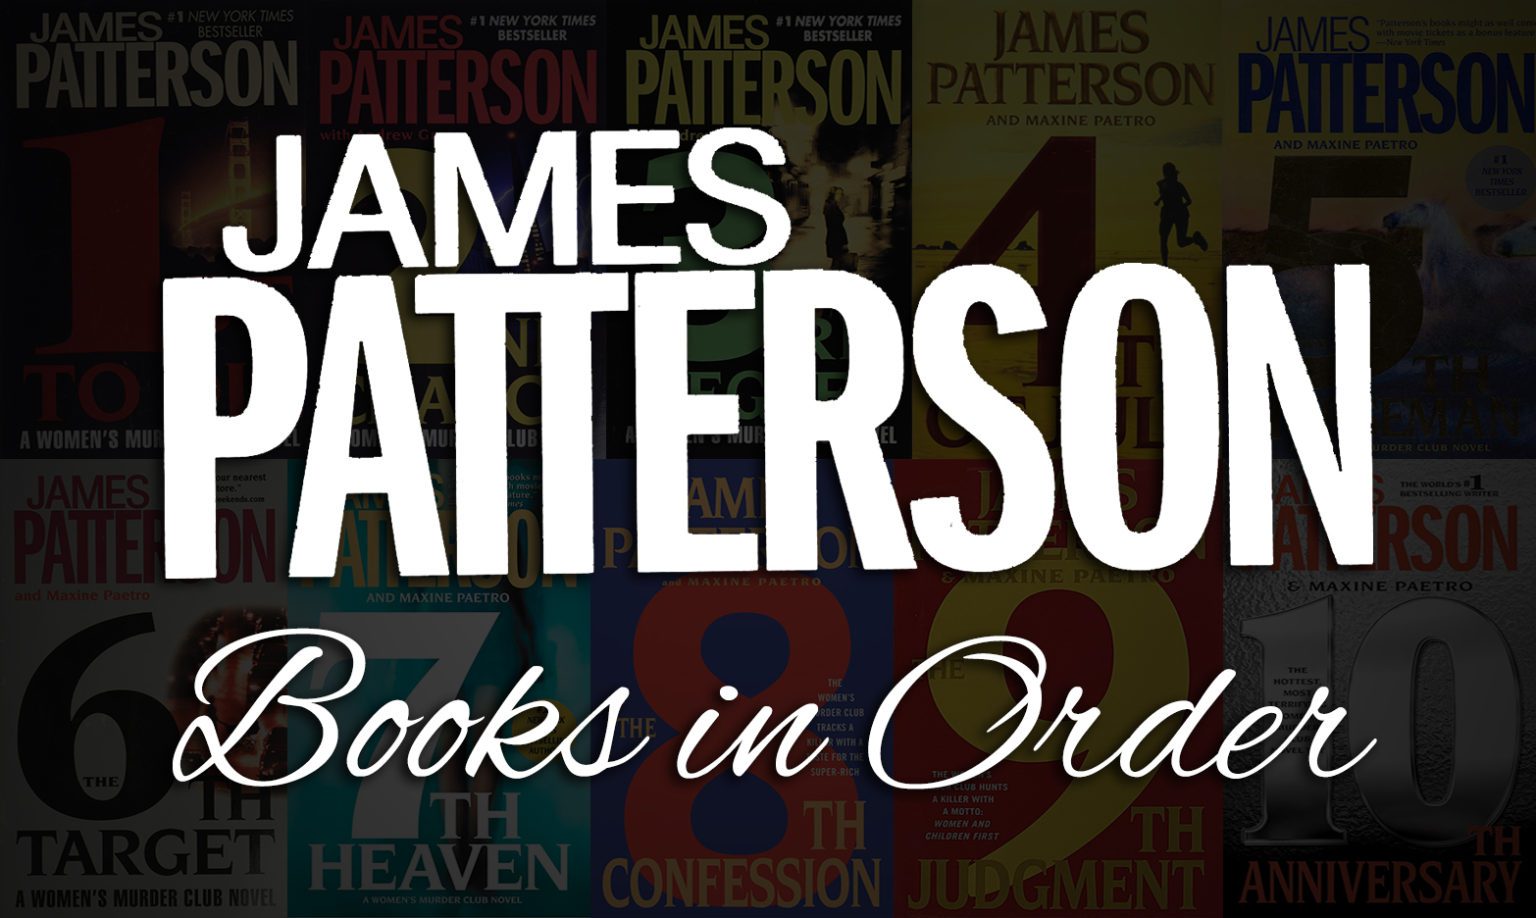 best rated books by james patterson